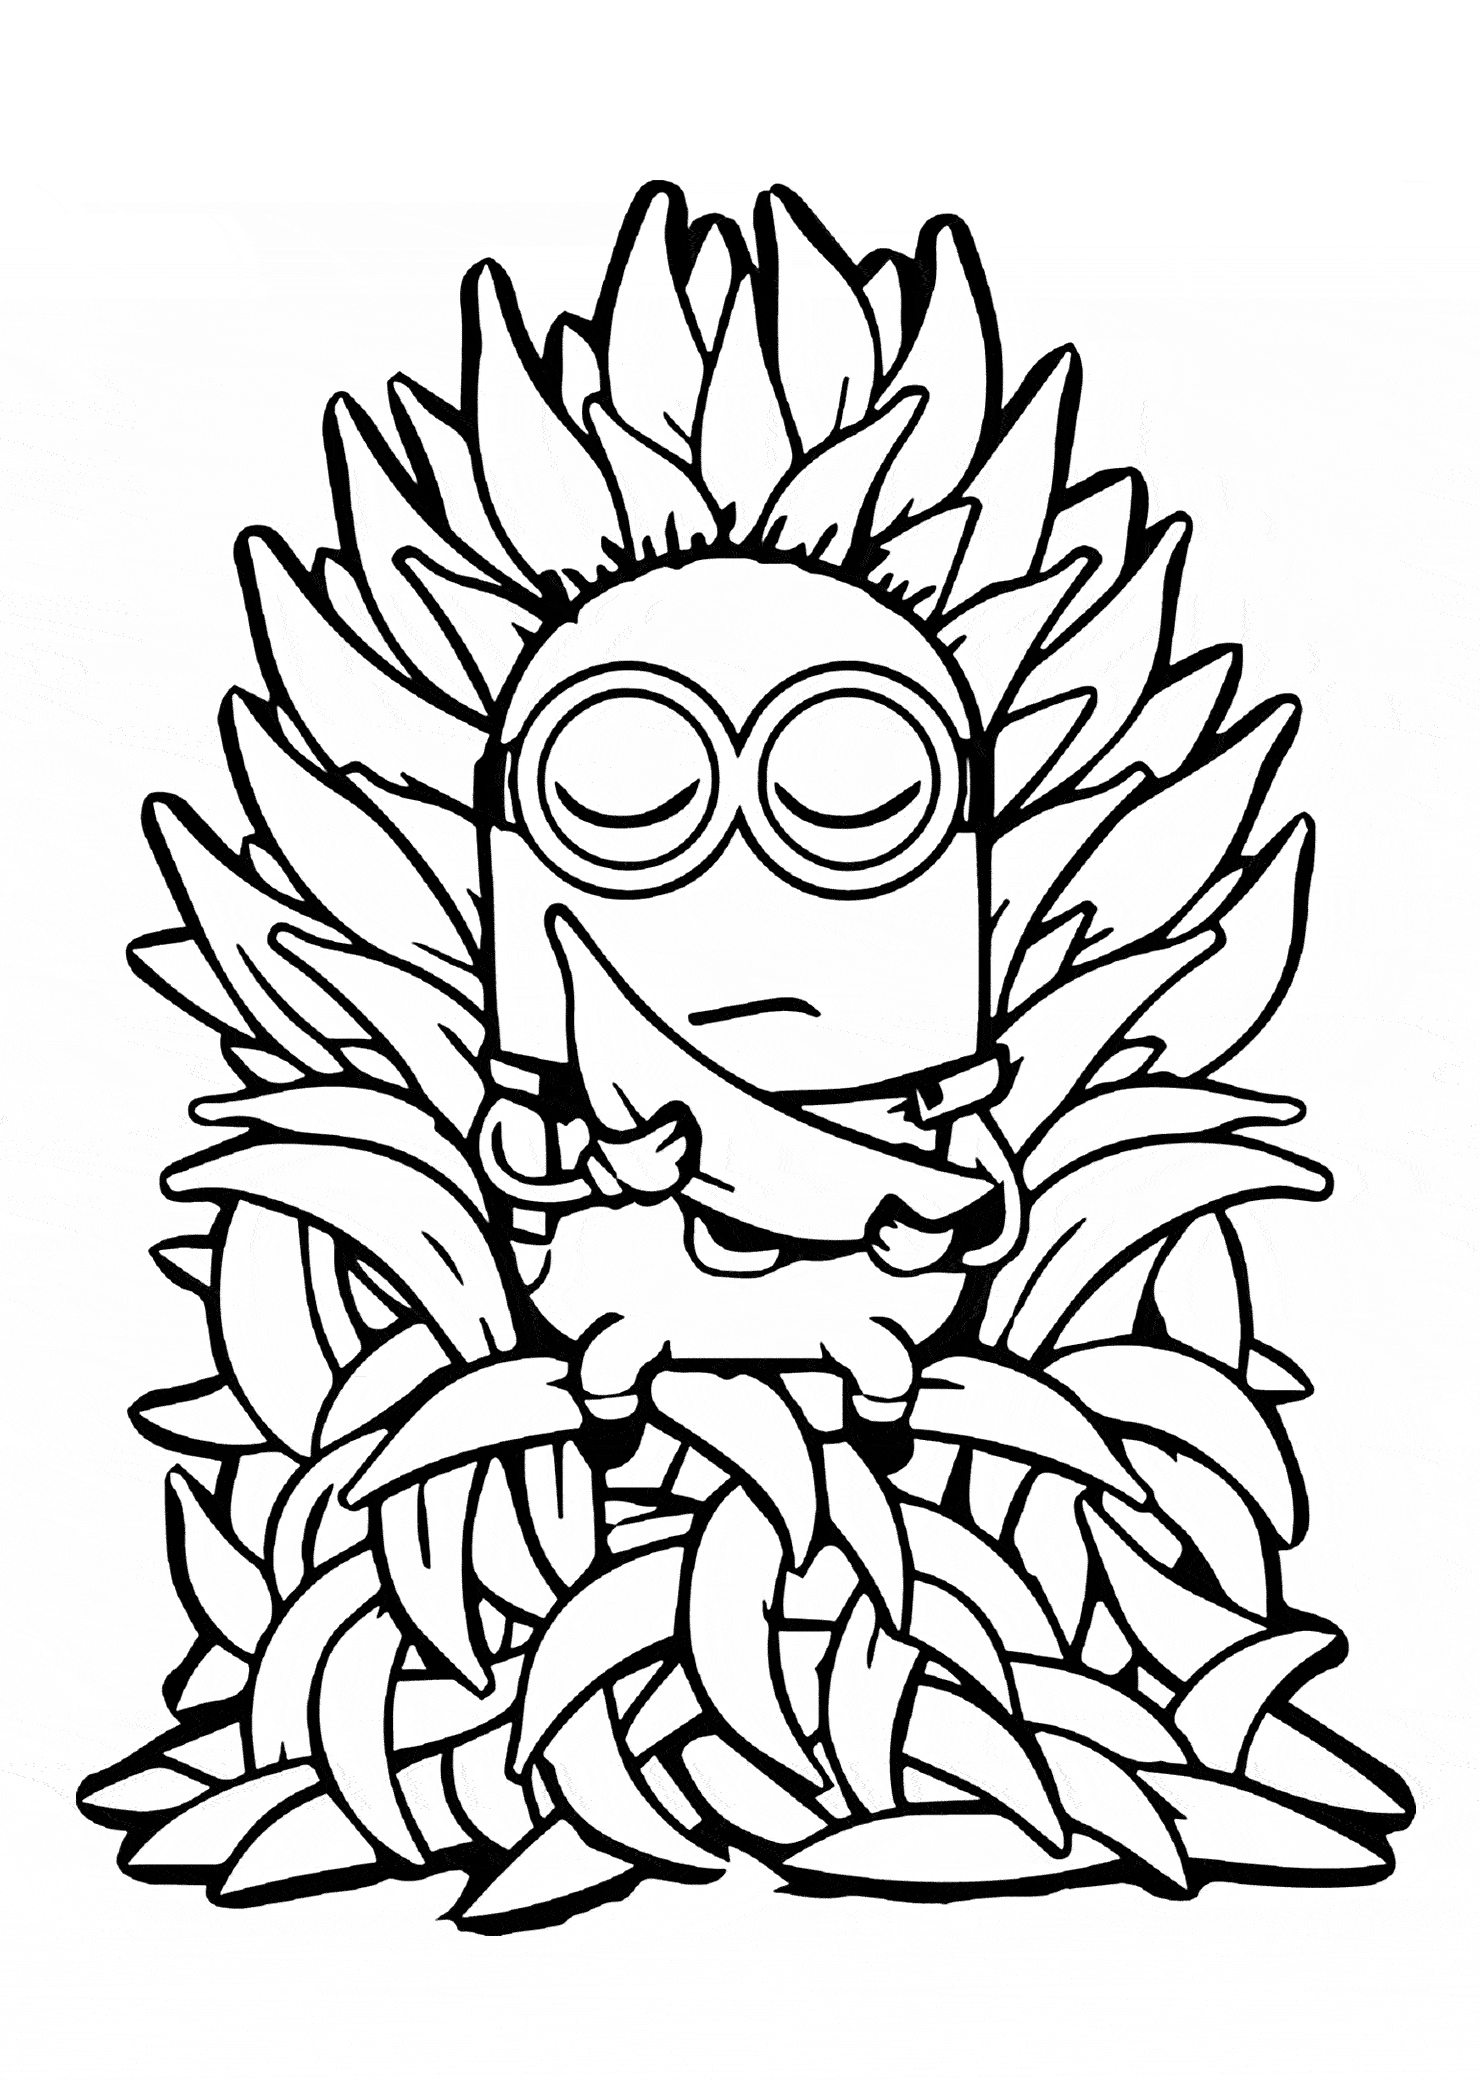 Minions for children - Minions Kids Coloring Pages